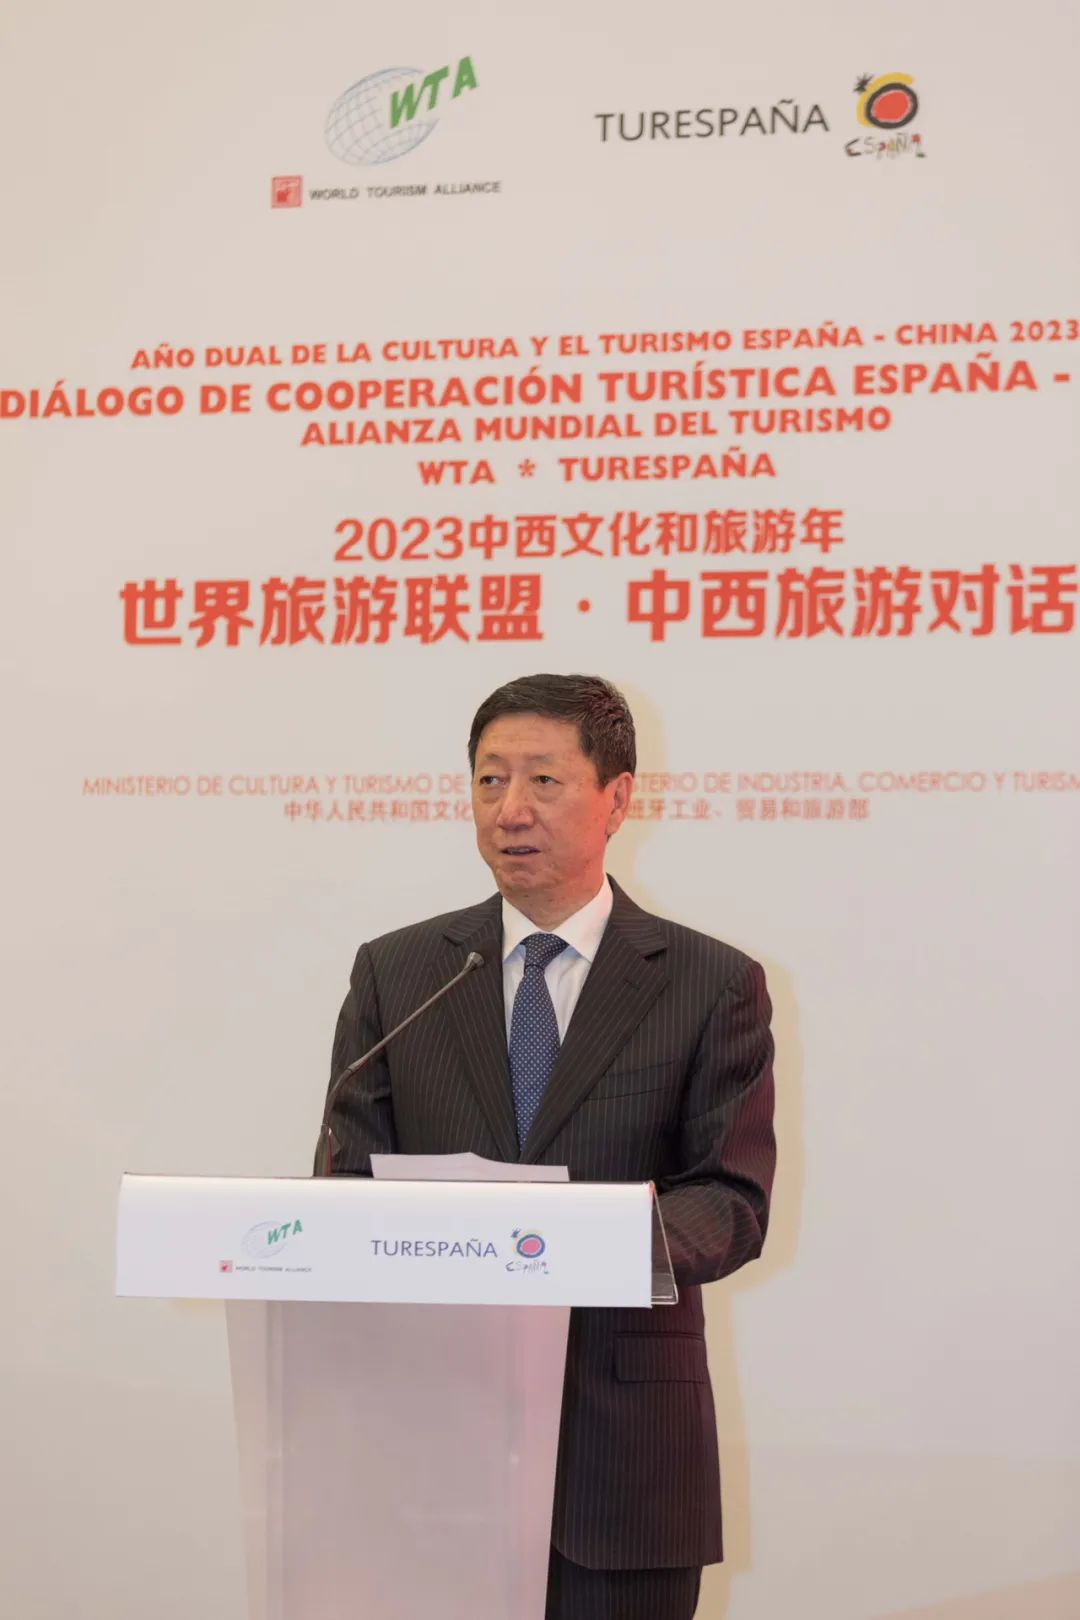 WU Haitao, Ambassador of the People’s Republic of China in Spain and Andorra